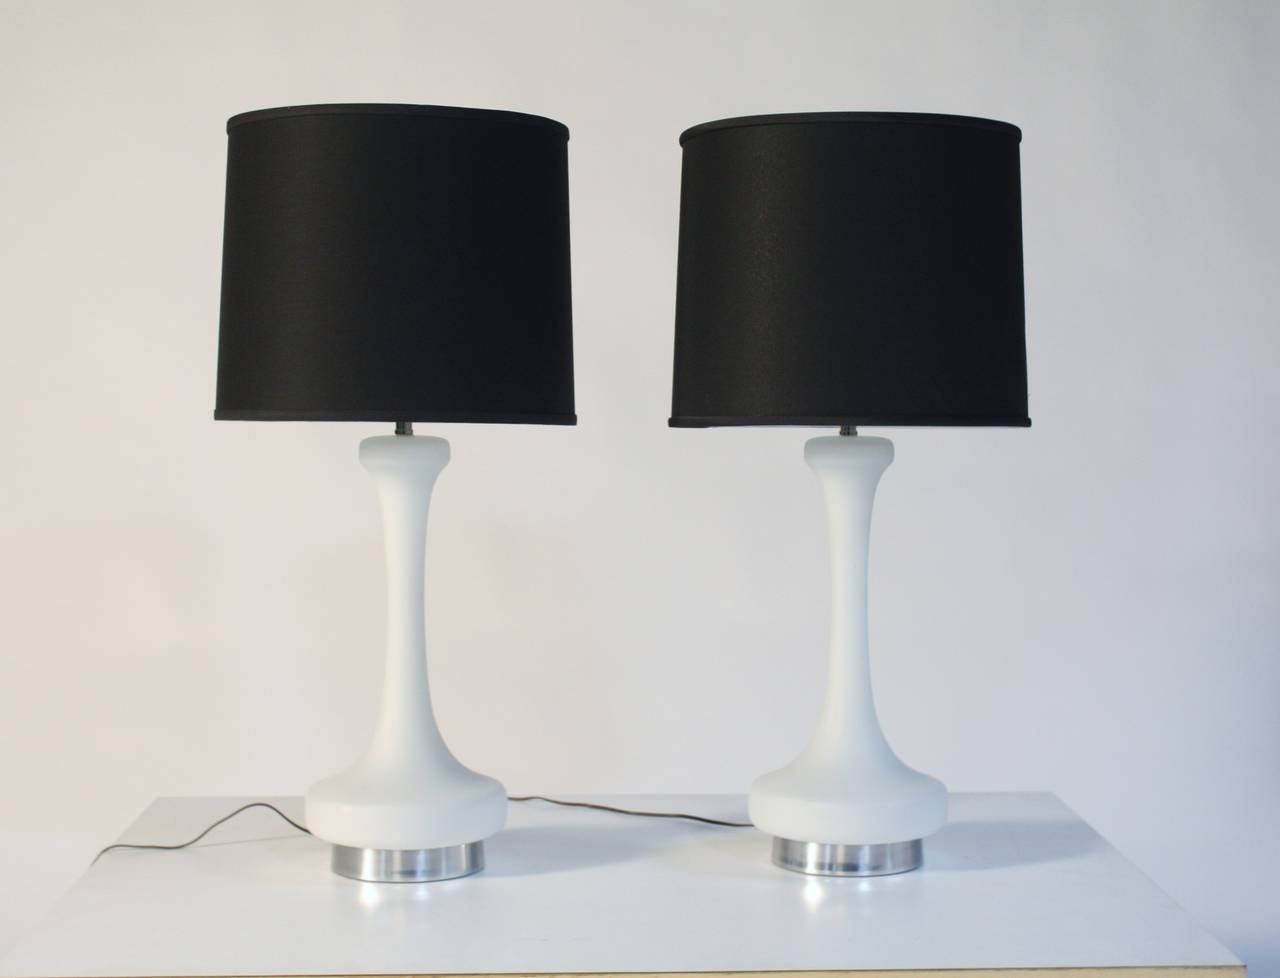 Elegant pair of 1970s white satin glass lamps with brushed chrome bases by Laurel.
Illuminates inside the base perfect for night light. New black shades measure 15